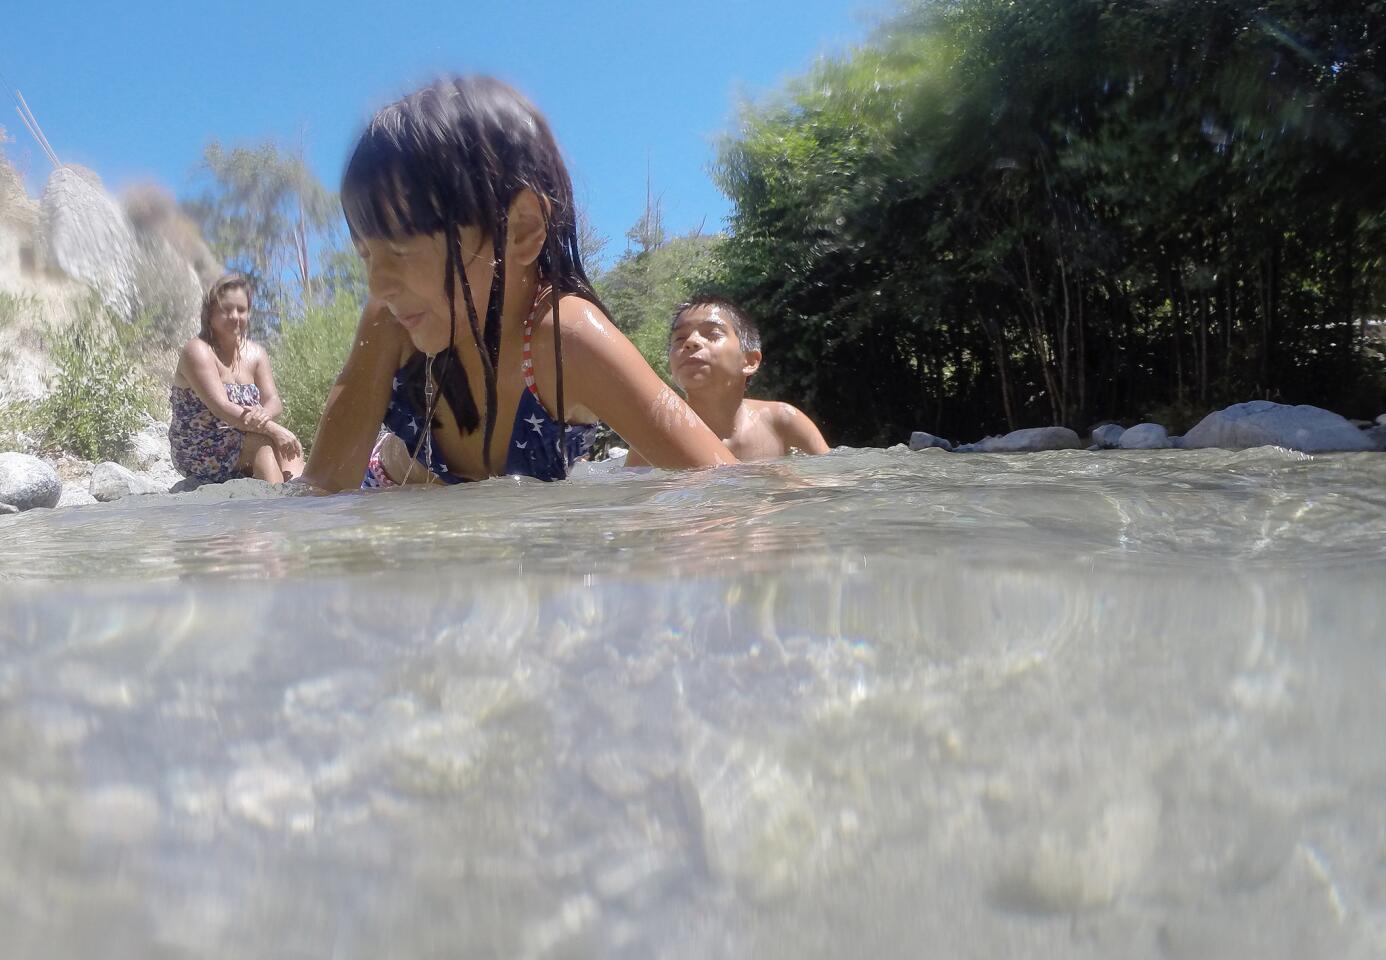 With temperatures scorching to 106 degrees, Kimberly Fuentes, 6, and her brother Anthony Villanueva, 11, of Riverside cool off in Lytle Creek, Calif.